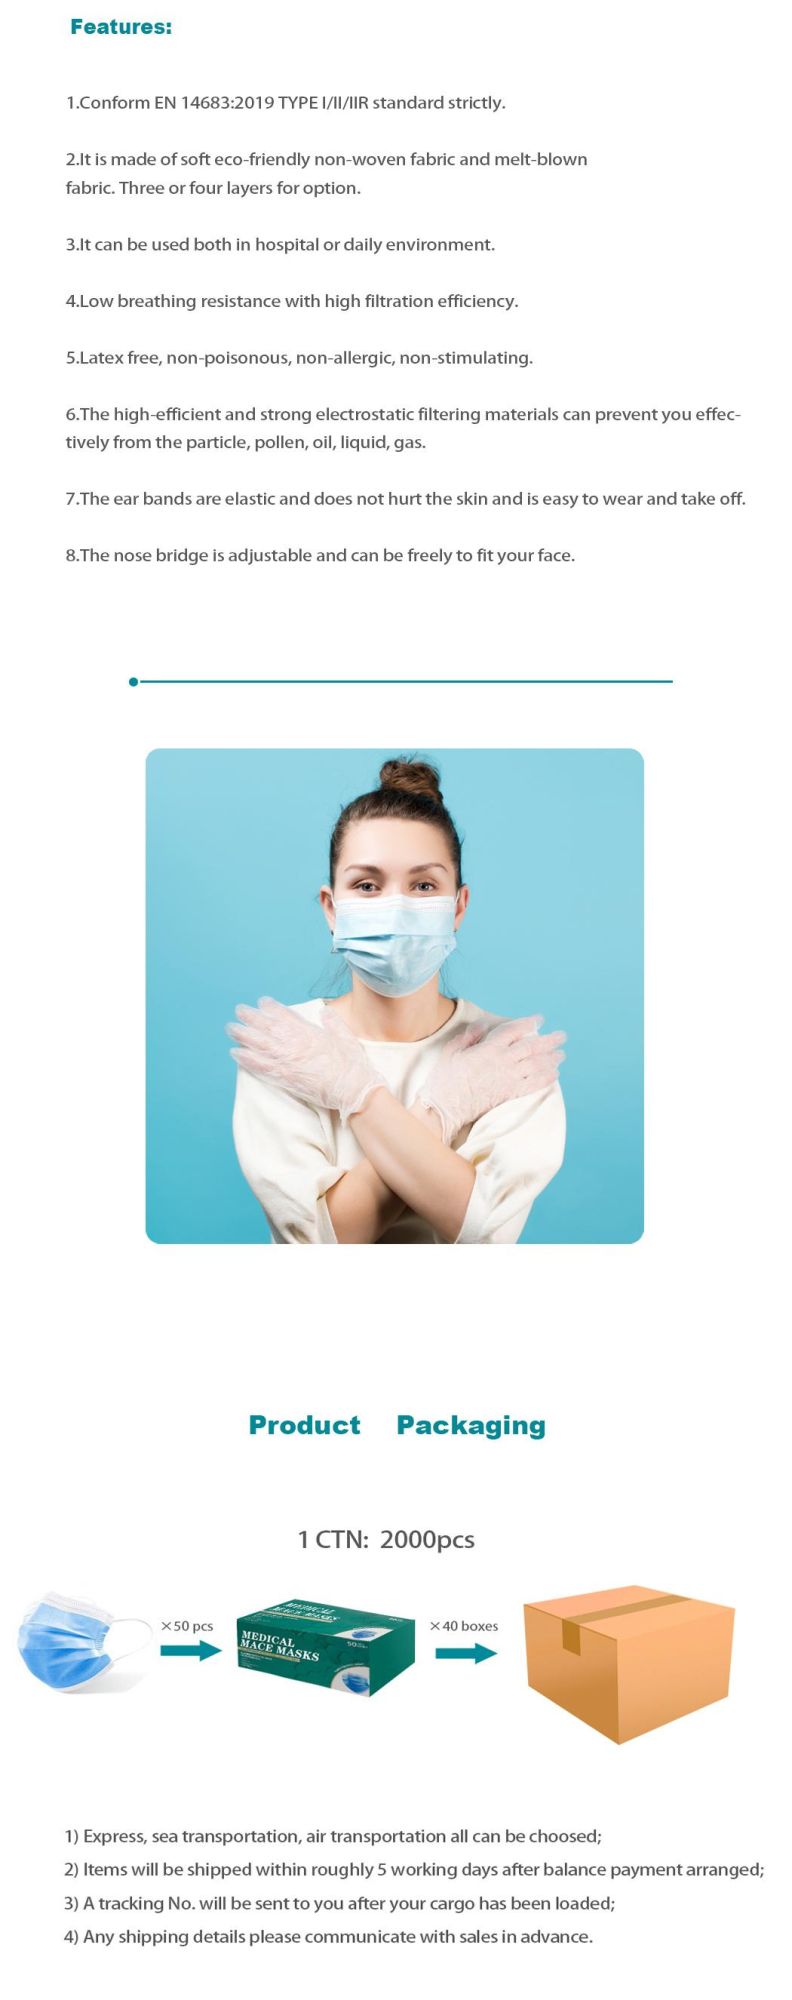 PPE Face Mask Made in China Disposable 3 Ply Extra Soft Spunbond Non-Woven Fabric Anti-Splash/Virus Type I/II/Iir Respirator Face Mask